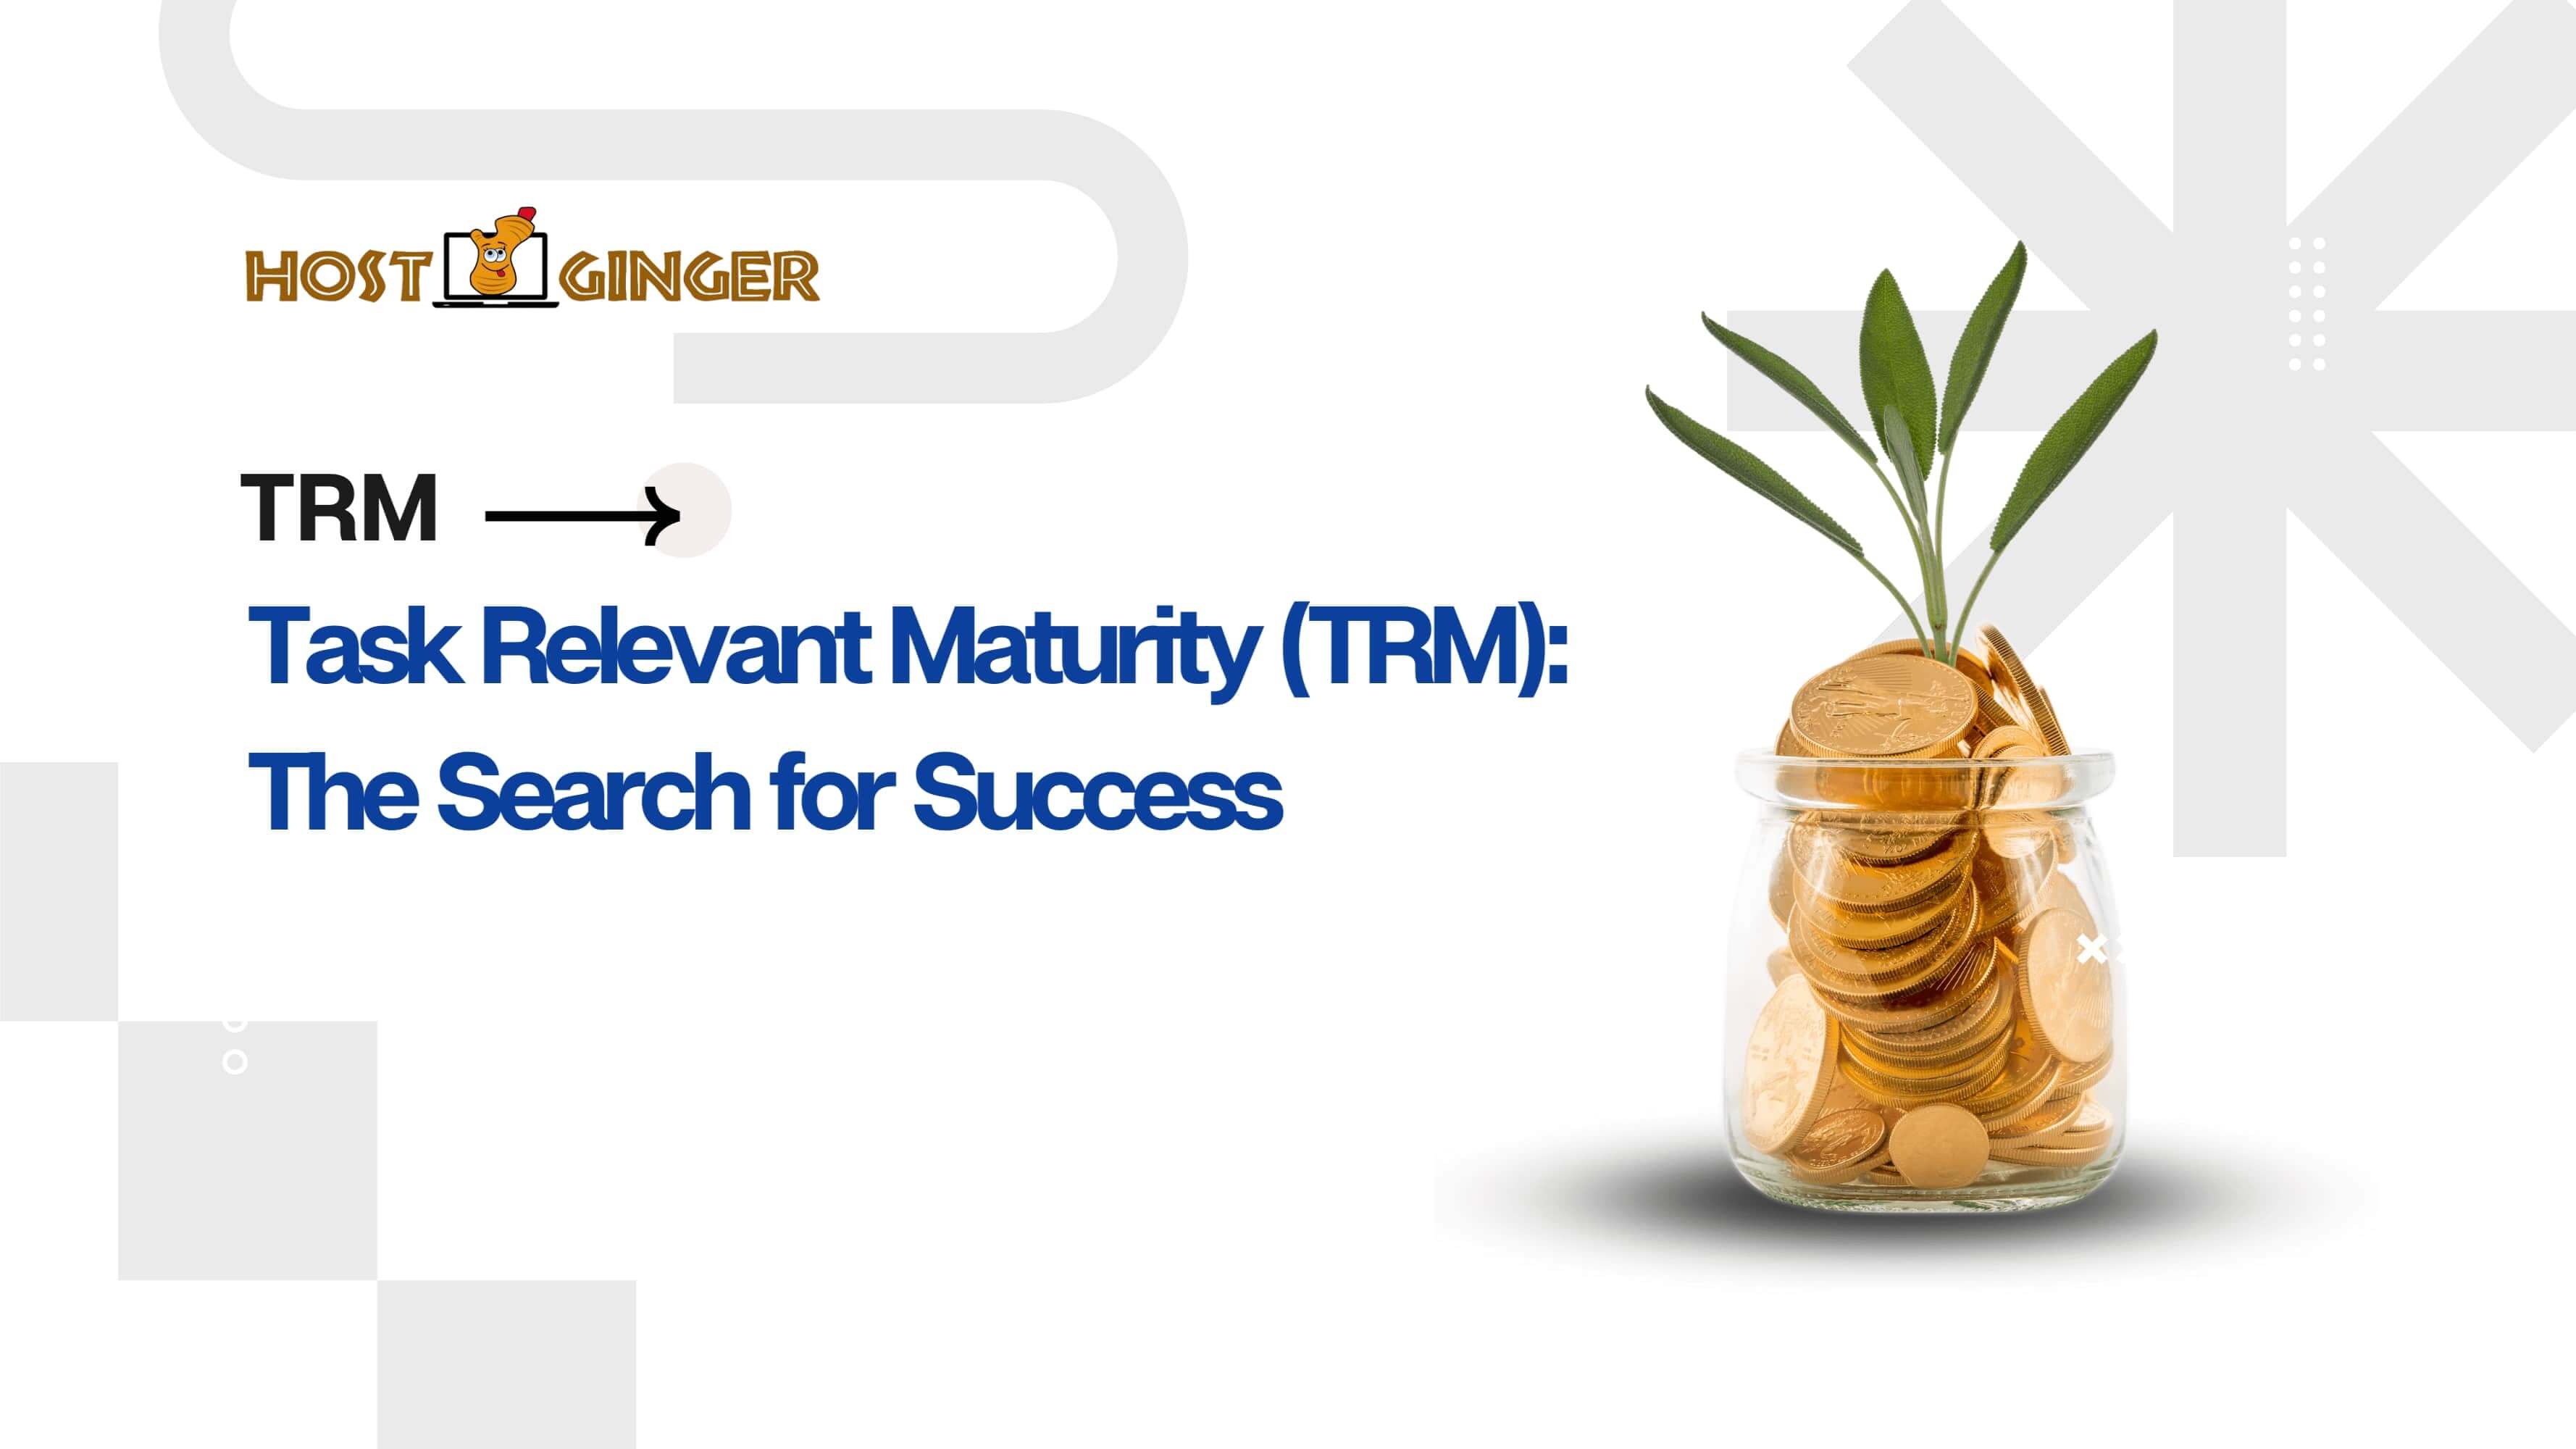 Task Relevant Maturity (TRM): The Search for Success